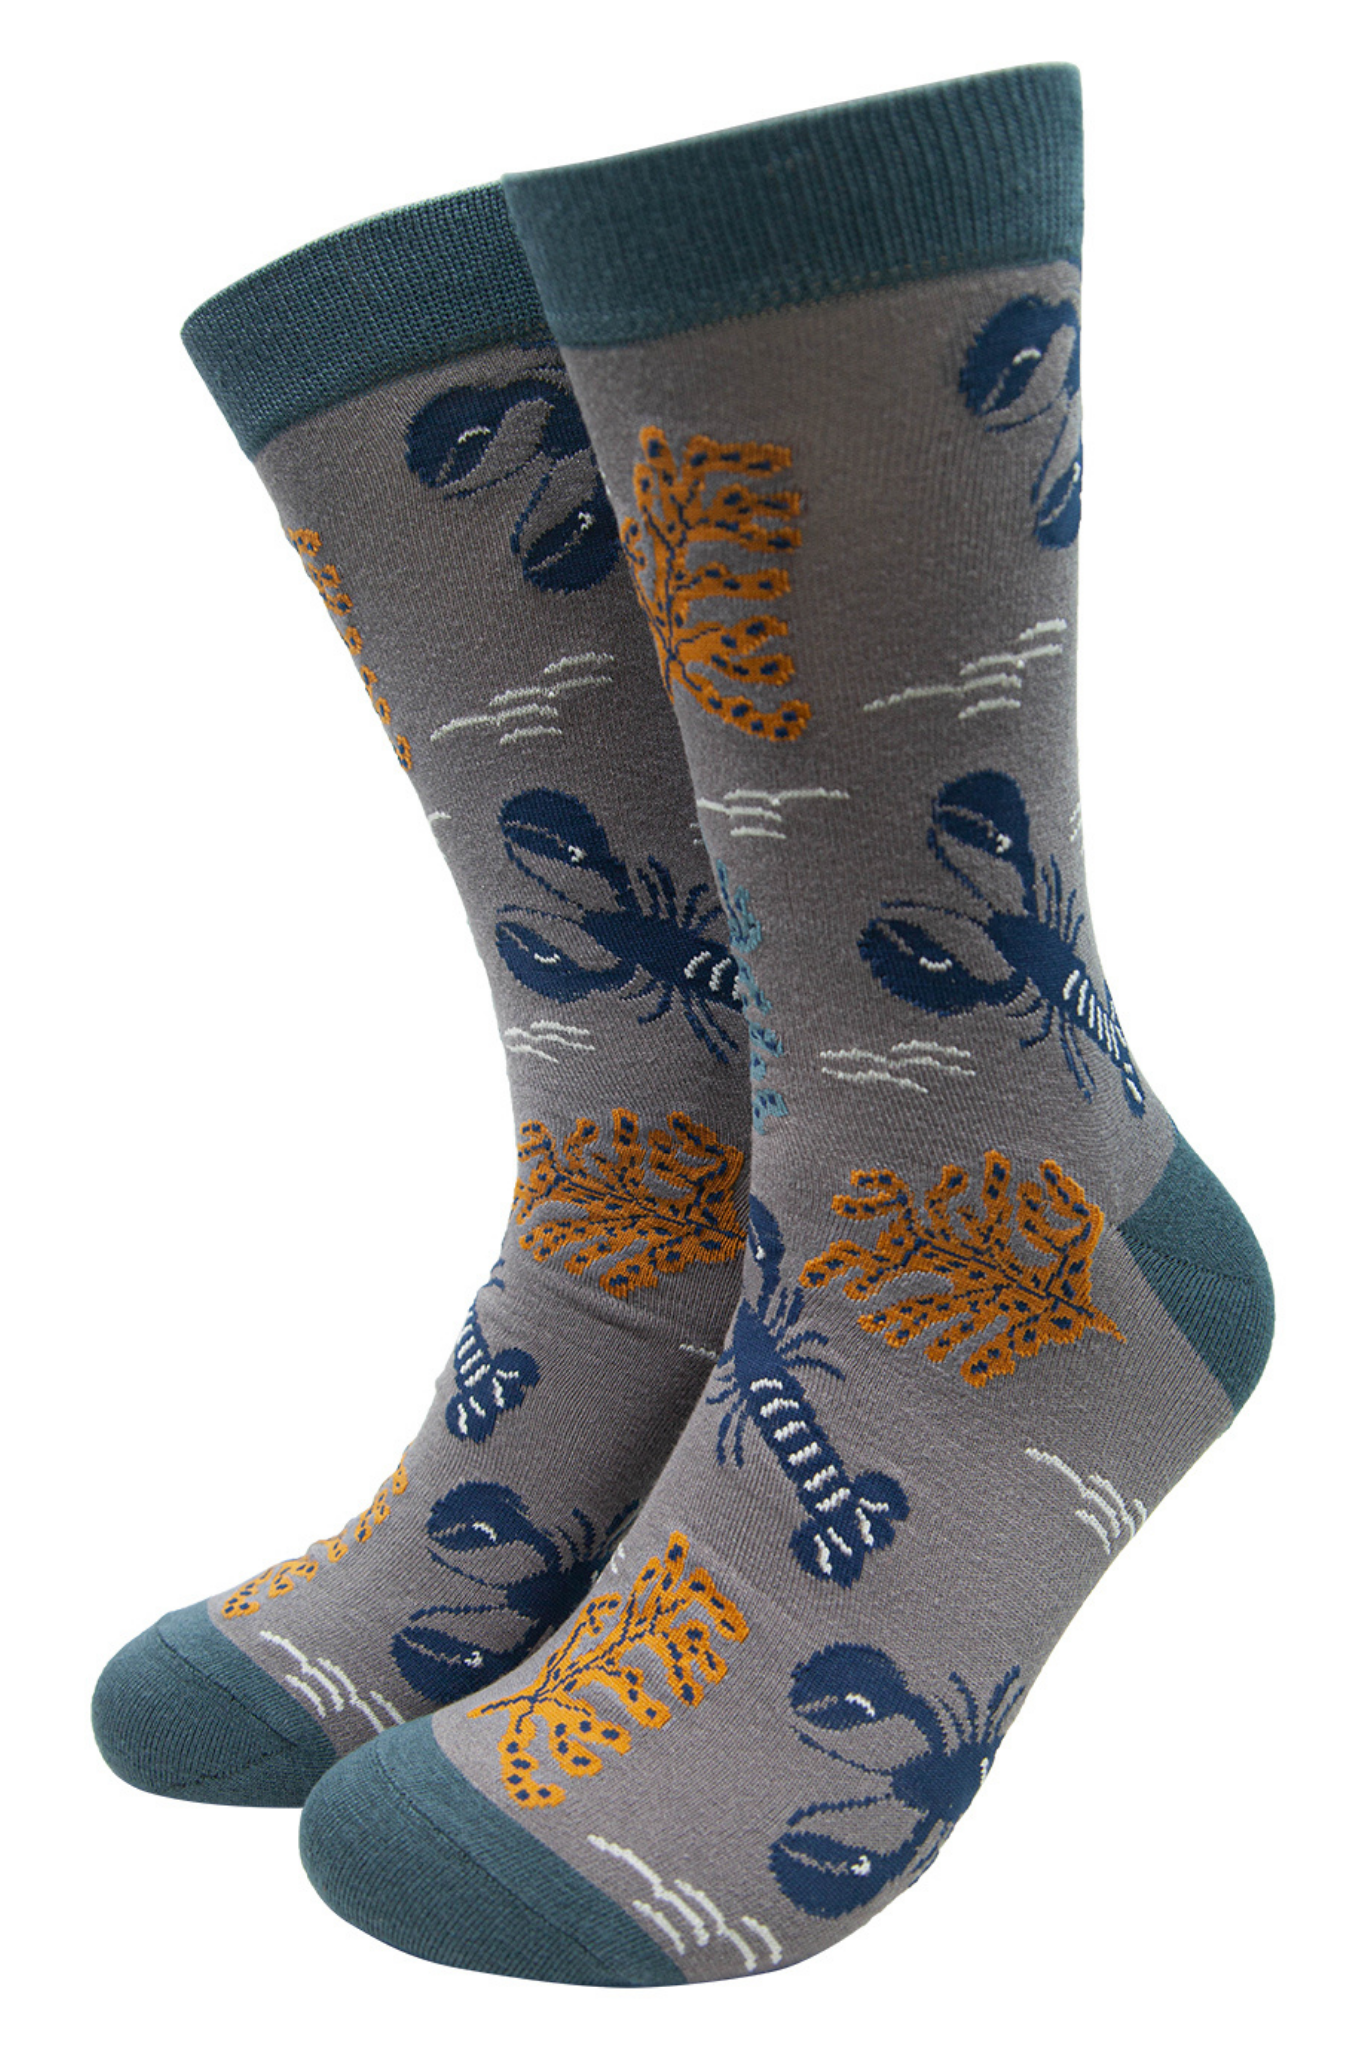 grey dress socks with a pattern of blue lobsters abd seaweed, like under the sea